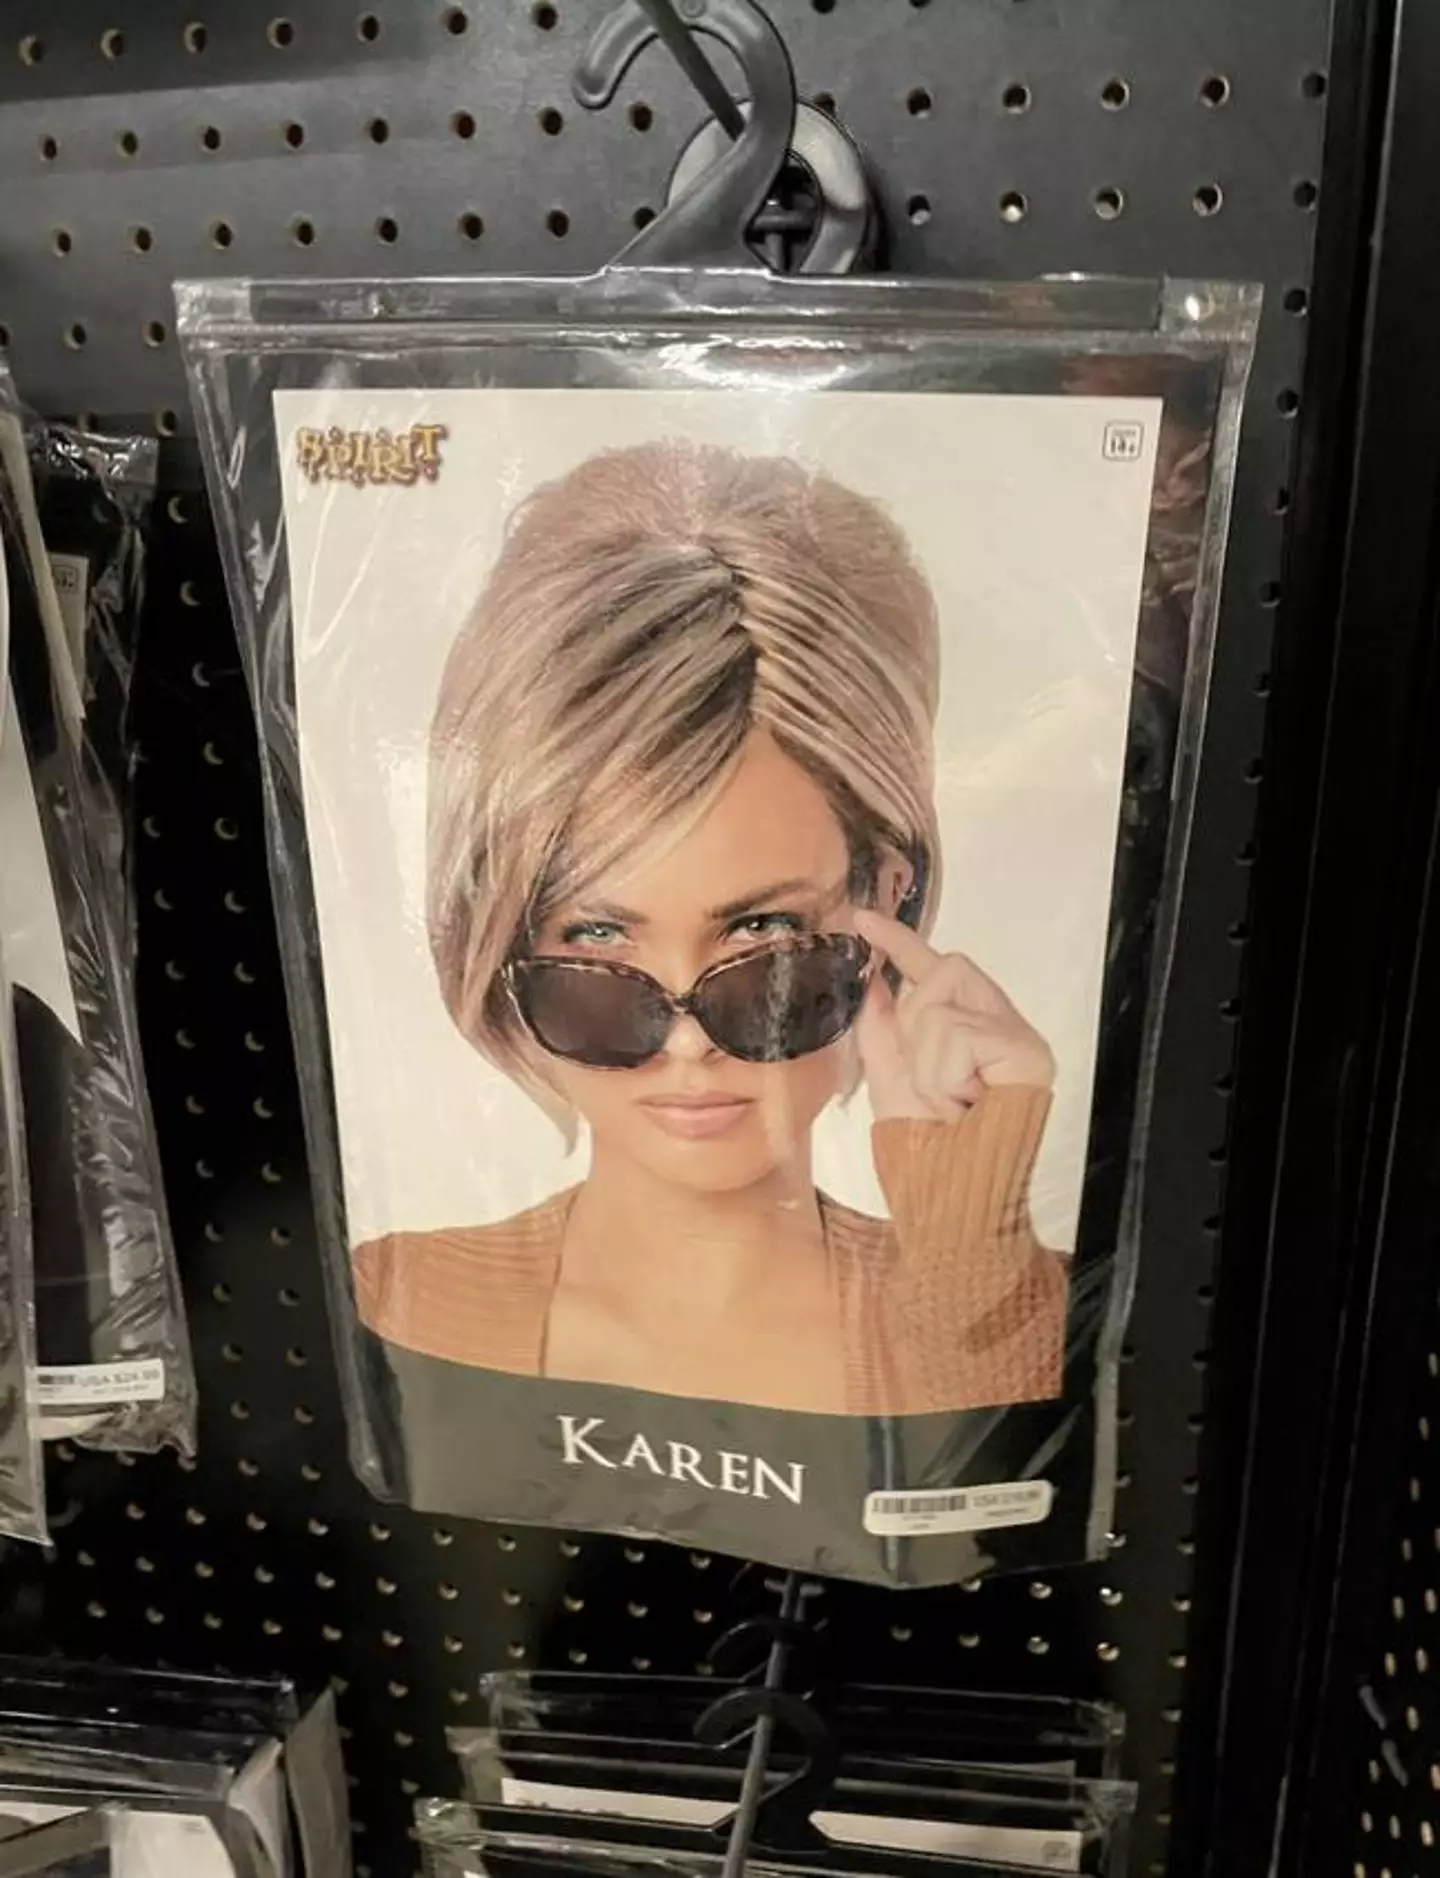 People are not happy with this Karen costume (